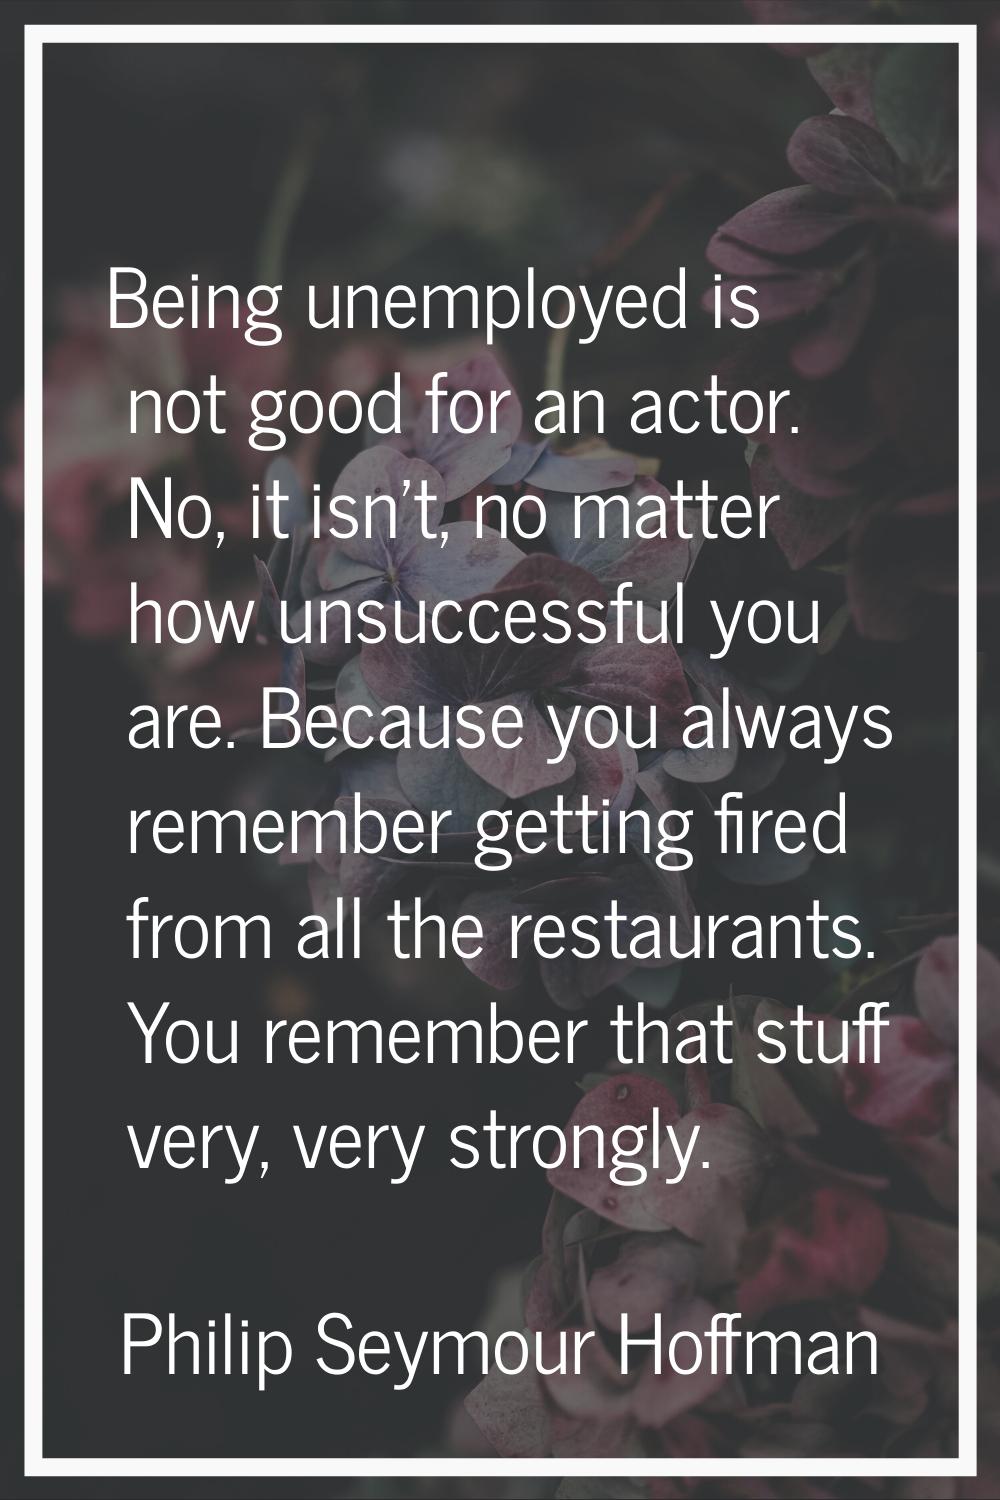 Being unemployed is not good for an actor. No, it isn't, no matter how unsuccessful you are. Becaus